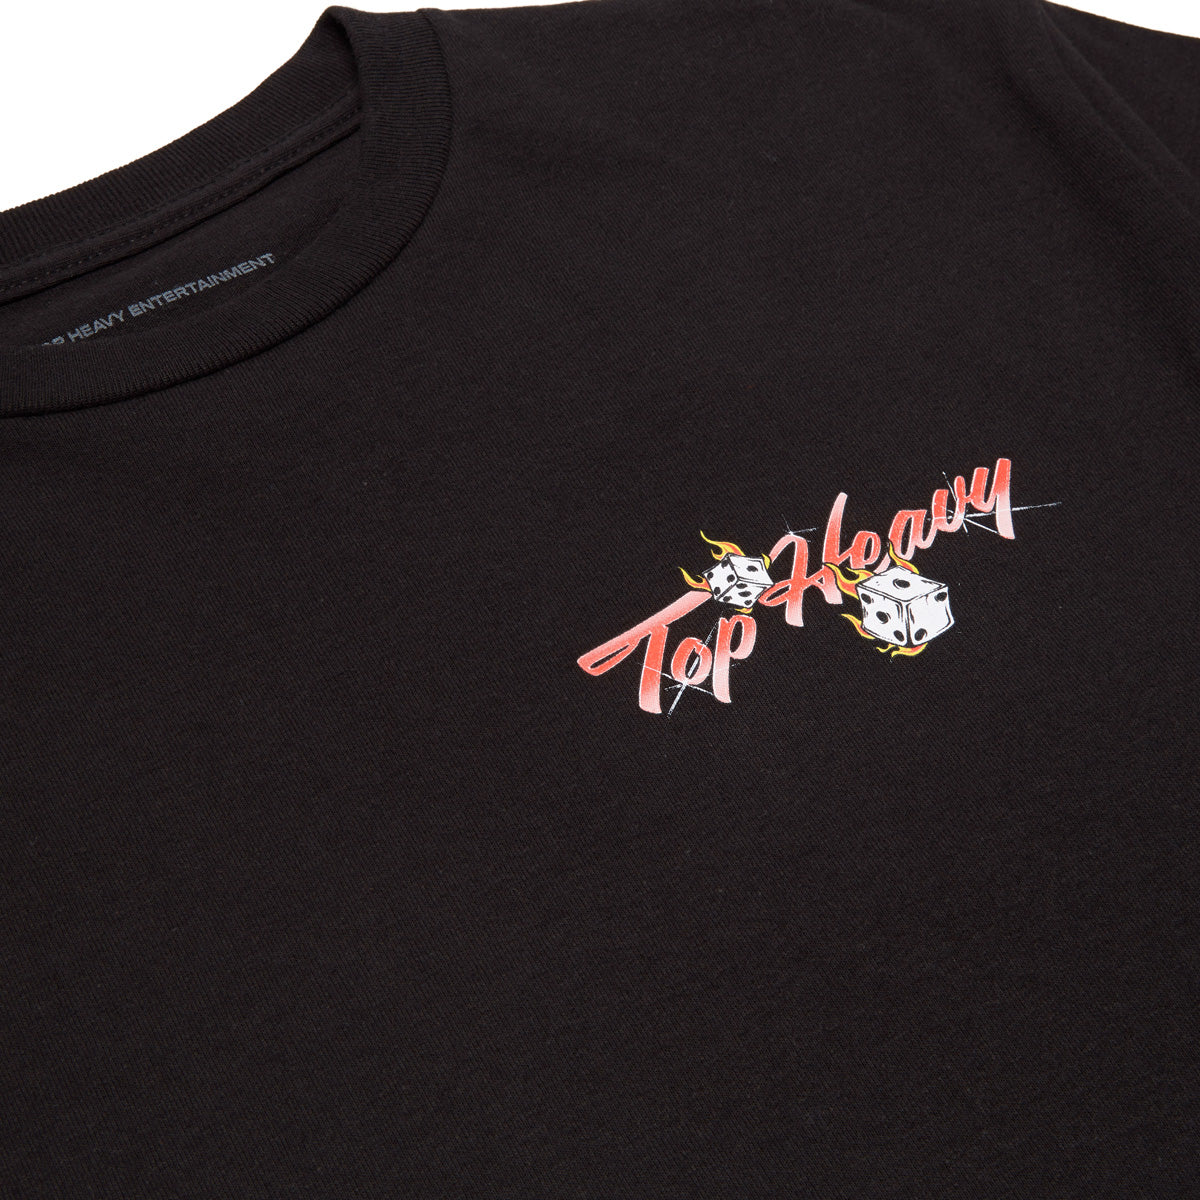 Top Heavy High Stakes T-Shirt - Black image 3